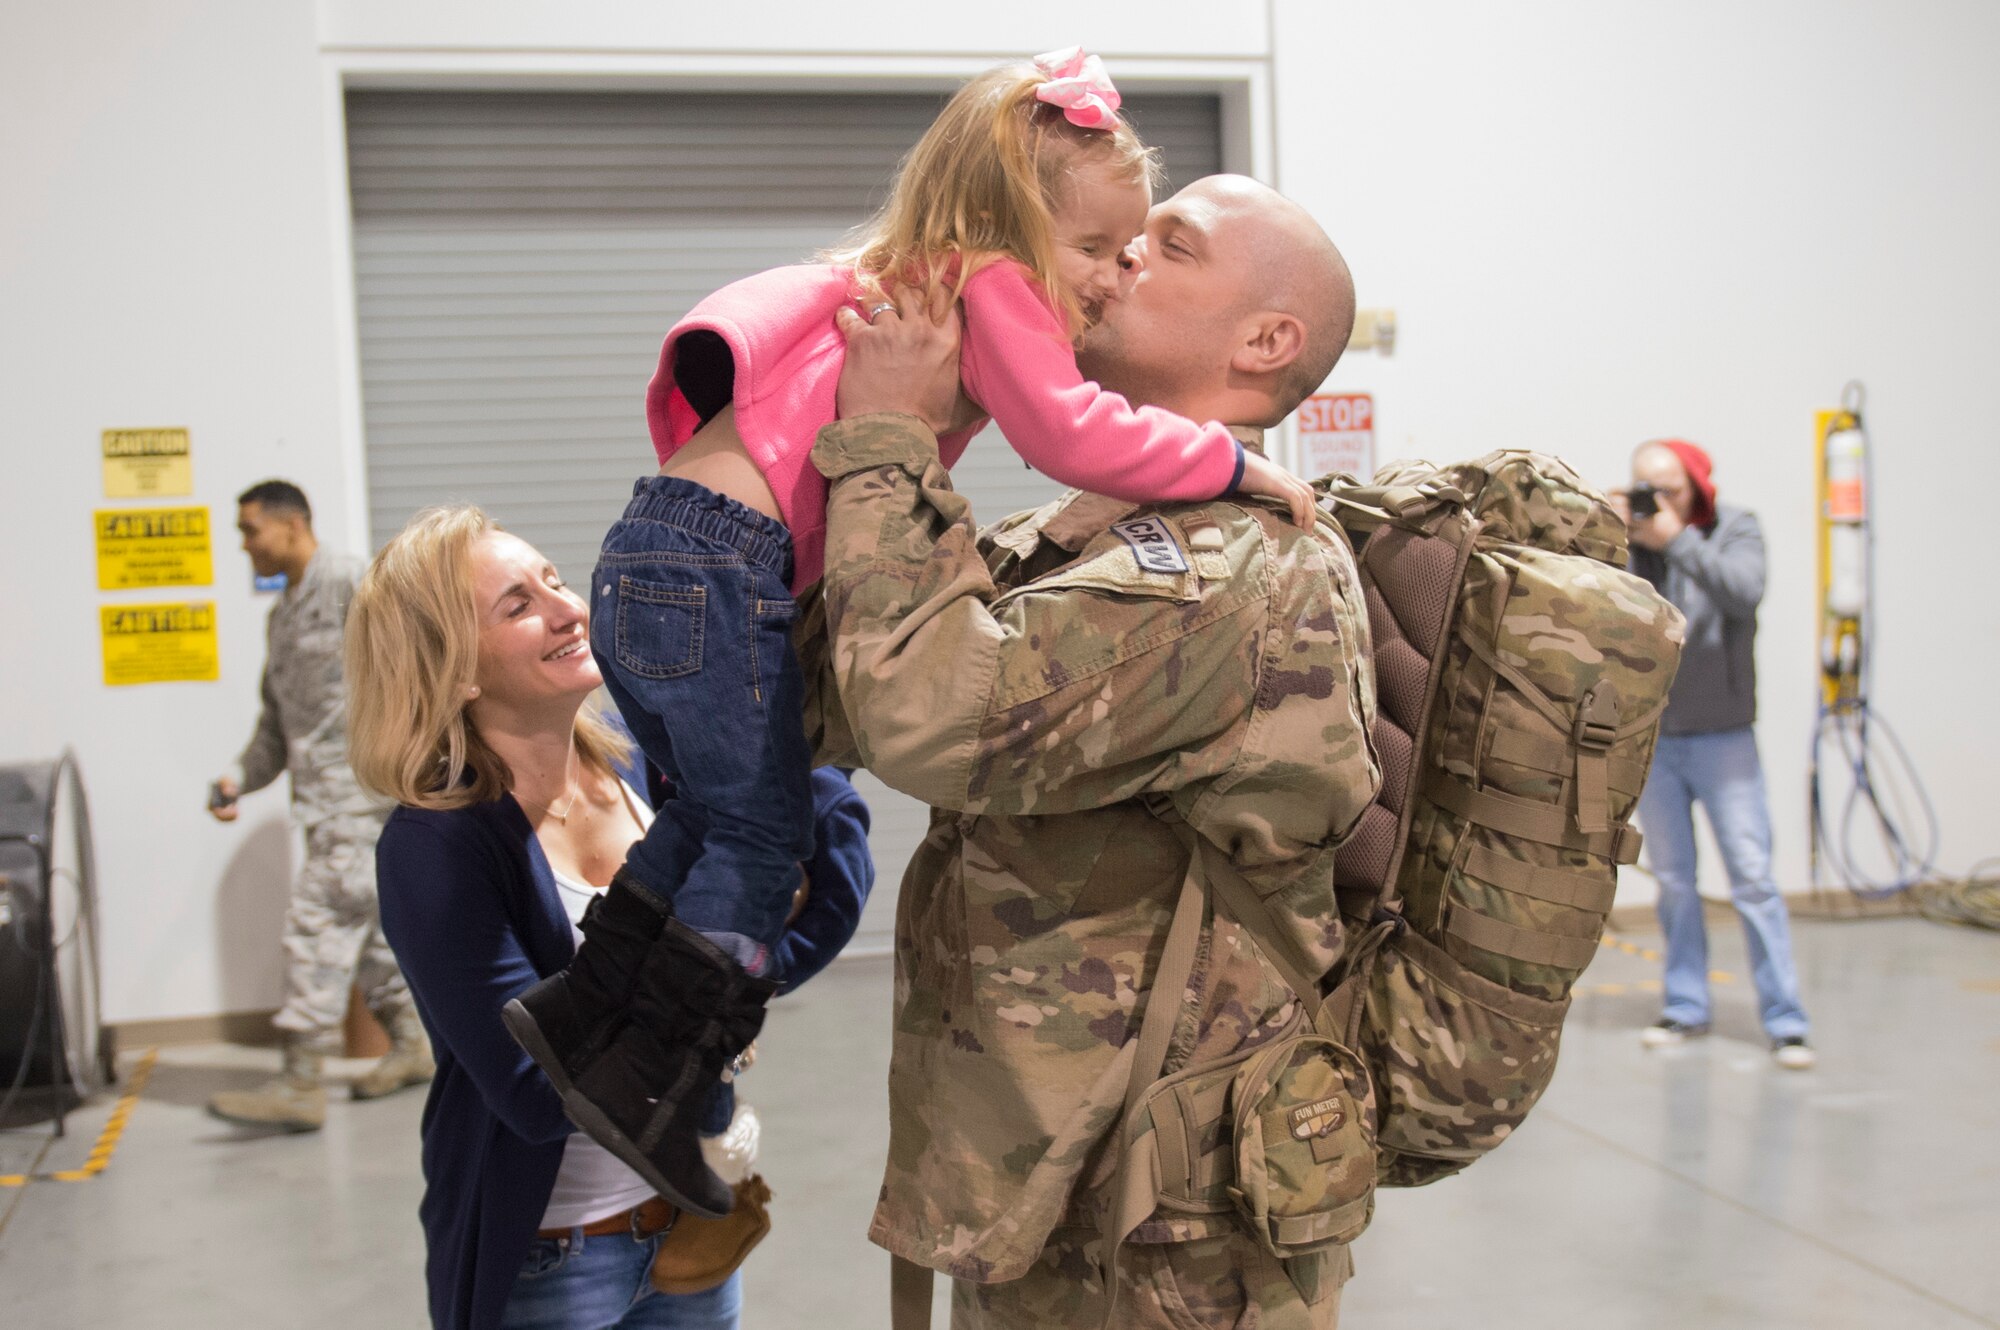 Capt. Jacob Becker, 921st Contingency Response Squadron airfield operations officer, hugs and kiss his daughter as he returns from a three-month deployment to Iraq, in support of Operation Inherent Resolve, Jan. 14, 2017, at Travis Air Force Base, California.  The CRW played a crucial role in reopening Qayyarah West Airfield and moving more than 1,423 short tons of cargo in and out of the region. (U.S. Air Force Photo by Tech. Sgt. Liliana Moreno)